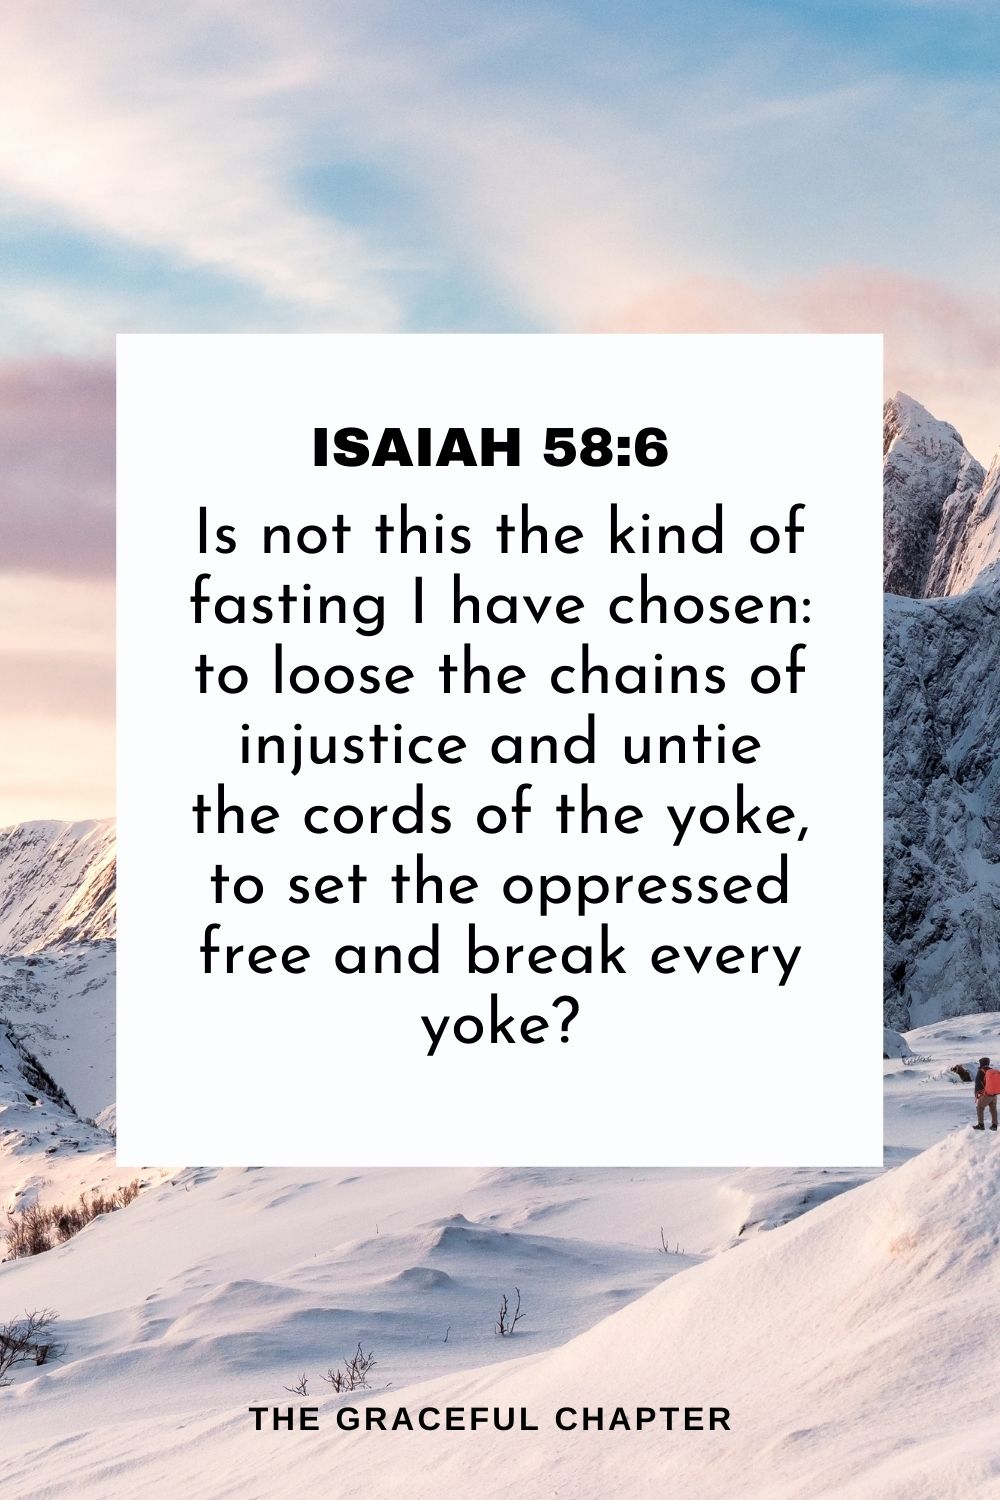 Is not this the kind of fasting I have chosen: to loose the chains of injustice and untie the cords of the yoke, to set the oppressed free and break every yoke? Isaiah 58:6